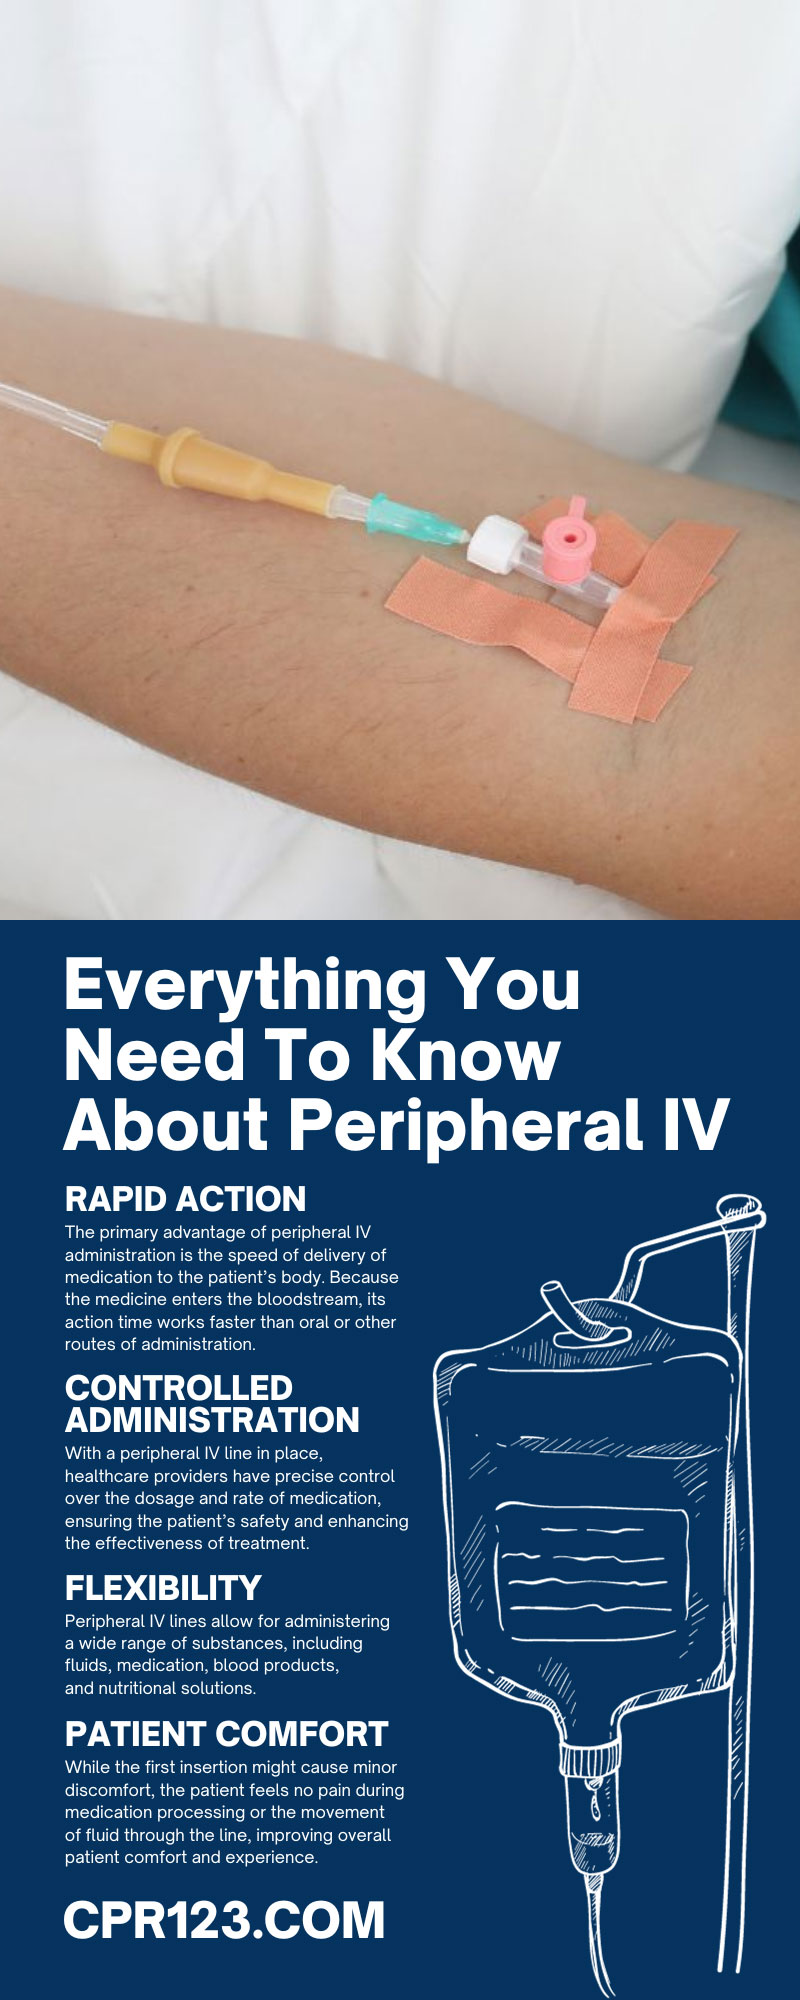 Everything You Need To Know About Peripheral IV
